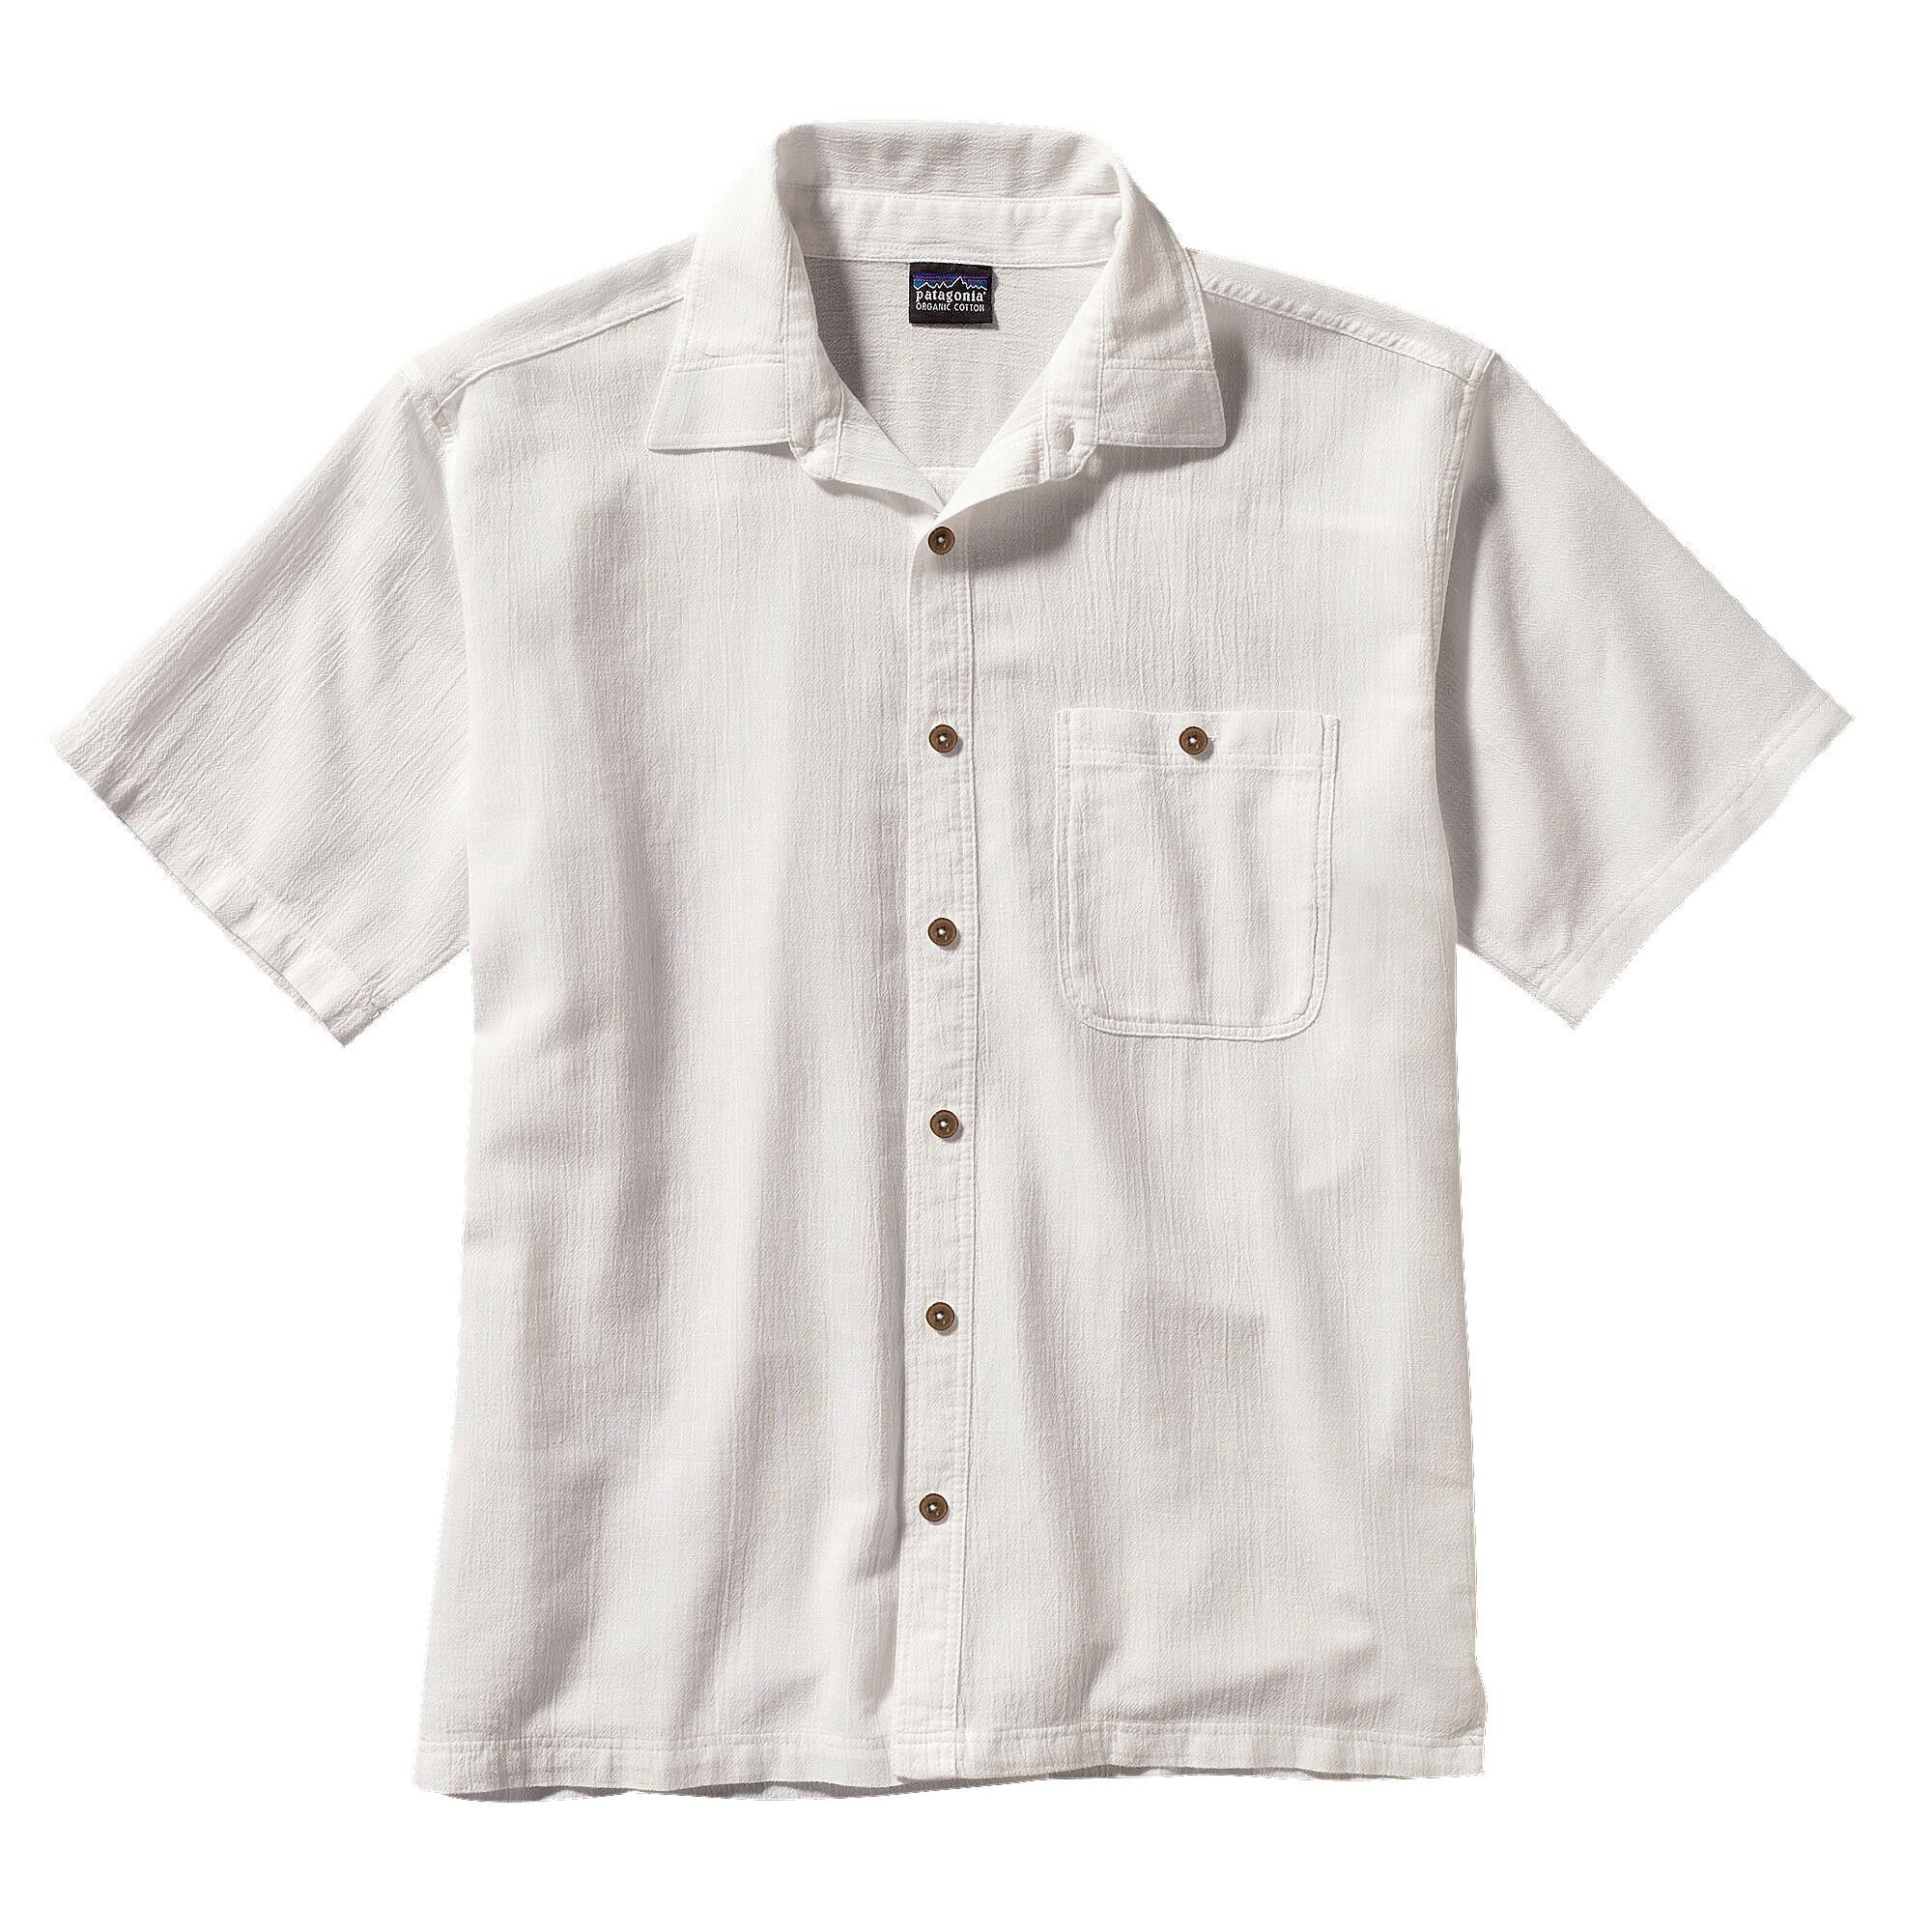 Patagonia A/C Shirt pas cher - Chemisette homme | Hardloop